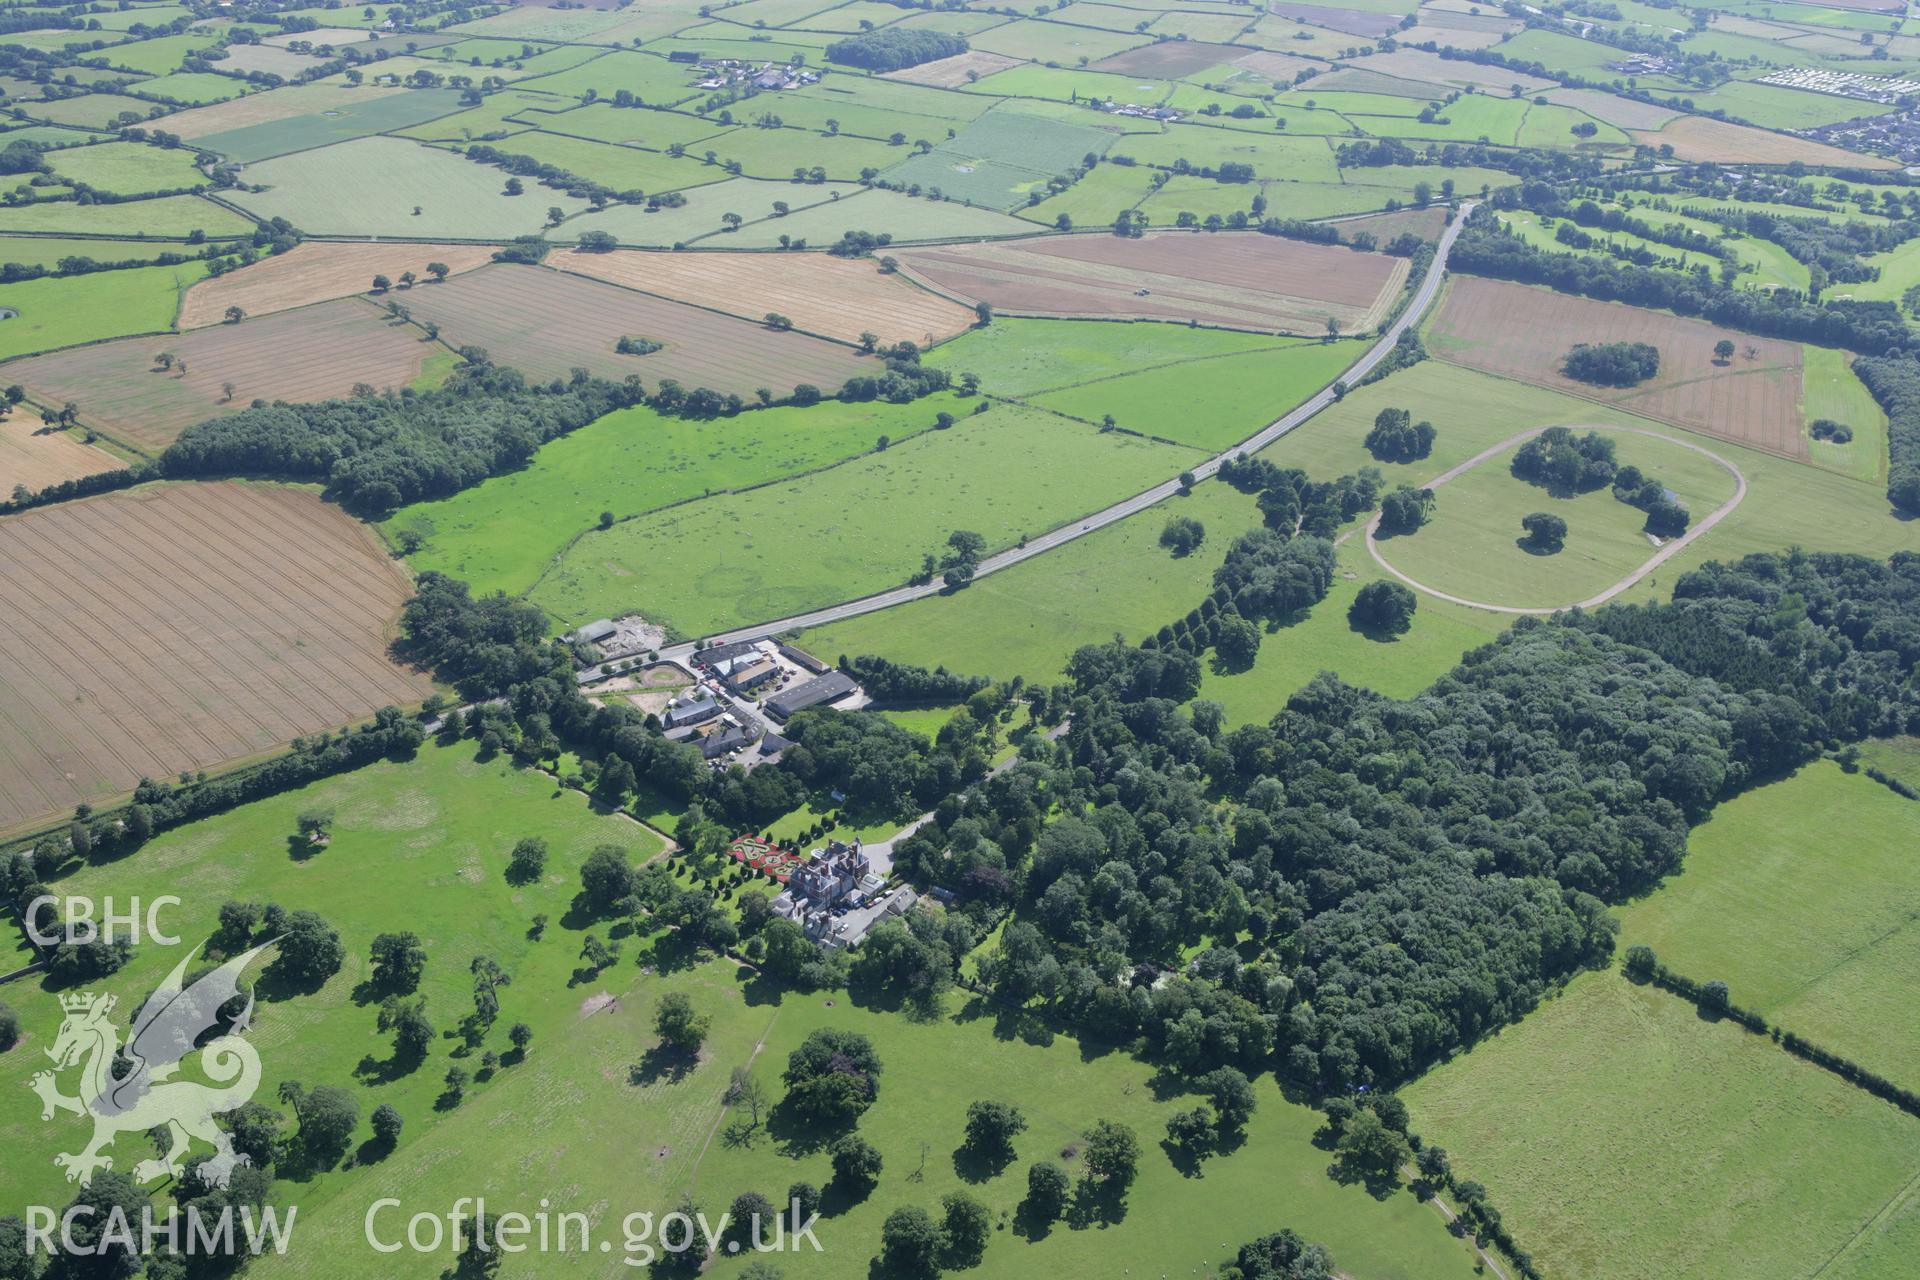 RCAHMW colour oblique aerial photograph of Bodrhyddan Hall and Garden. Taken on 31 July 2007 by Toby Driver